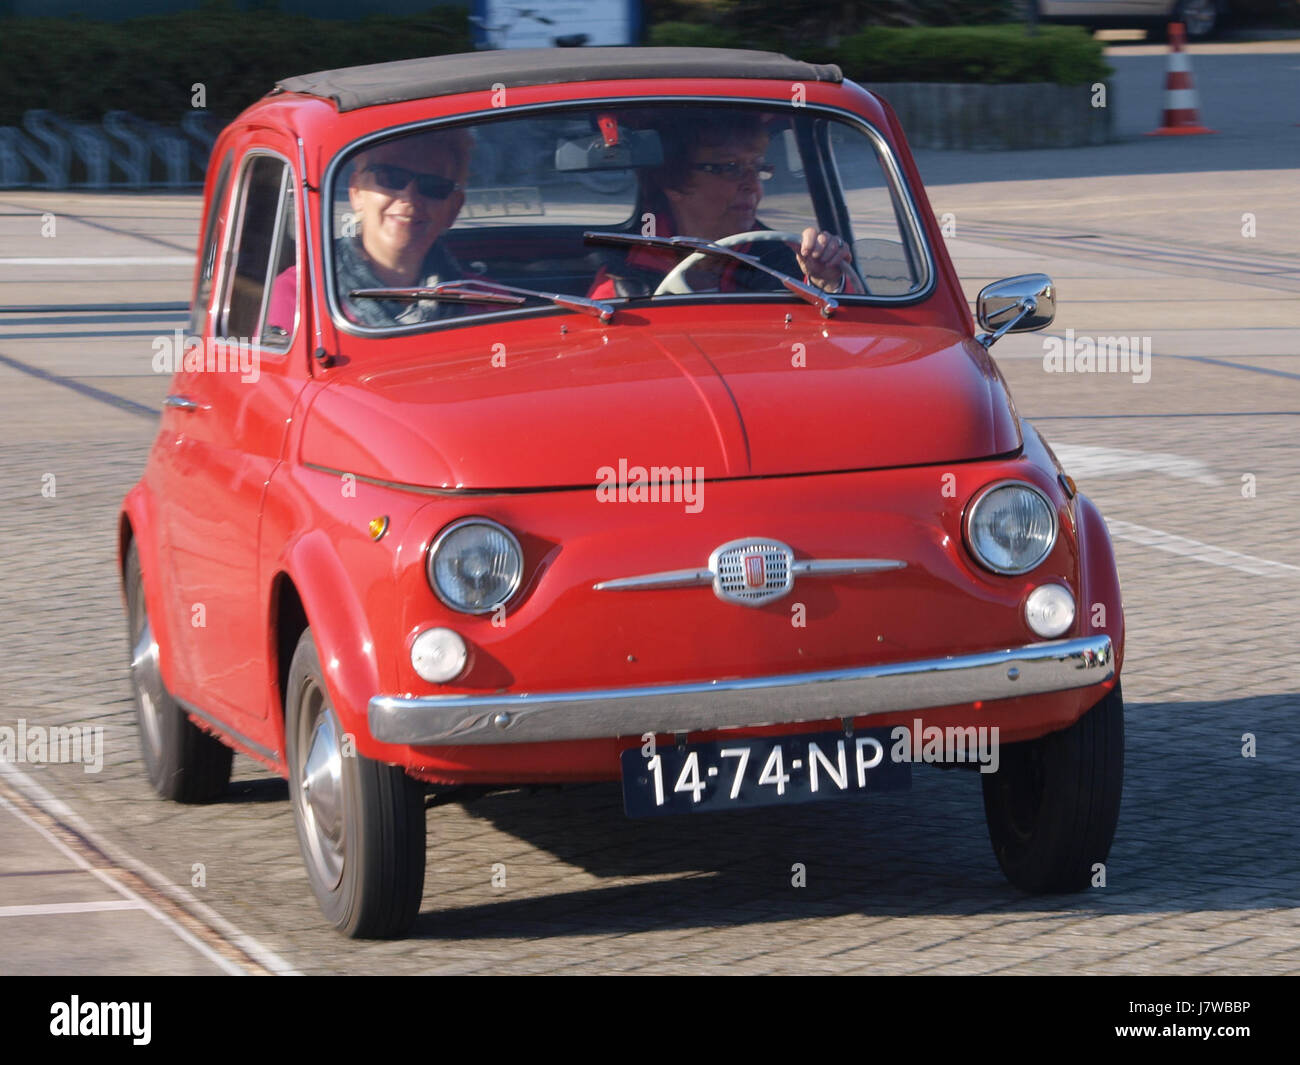 1970 Fiat , Dutch licence registration 14 74 NP, pic4 Stock Photo